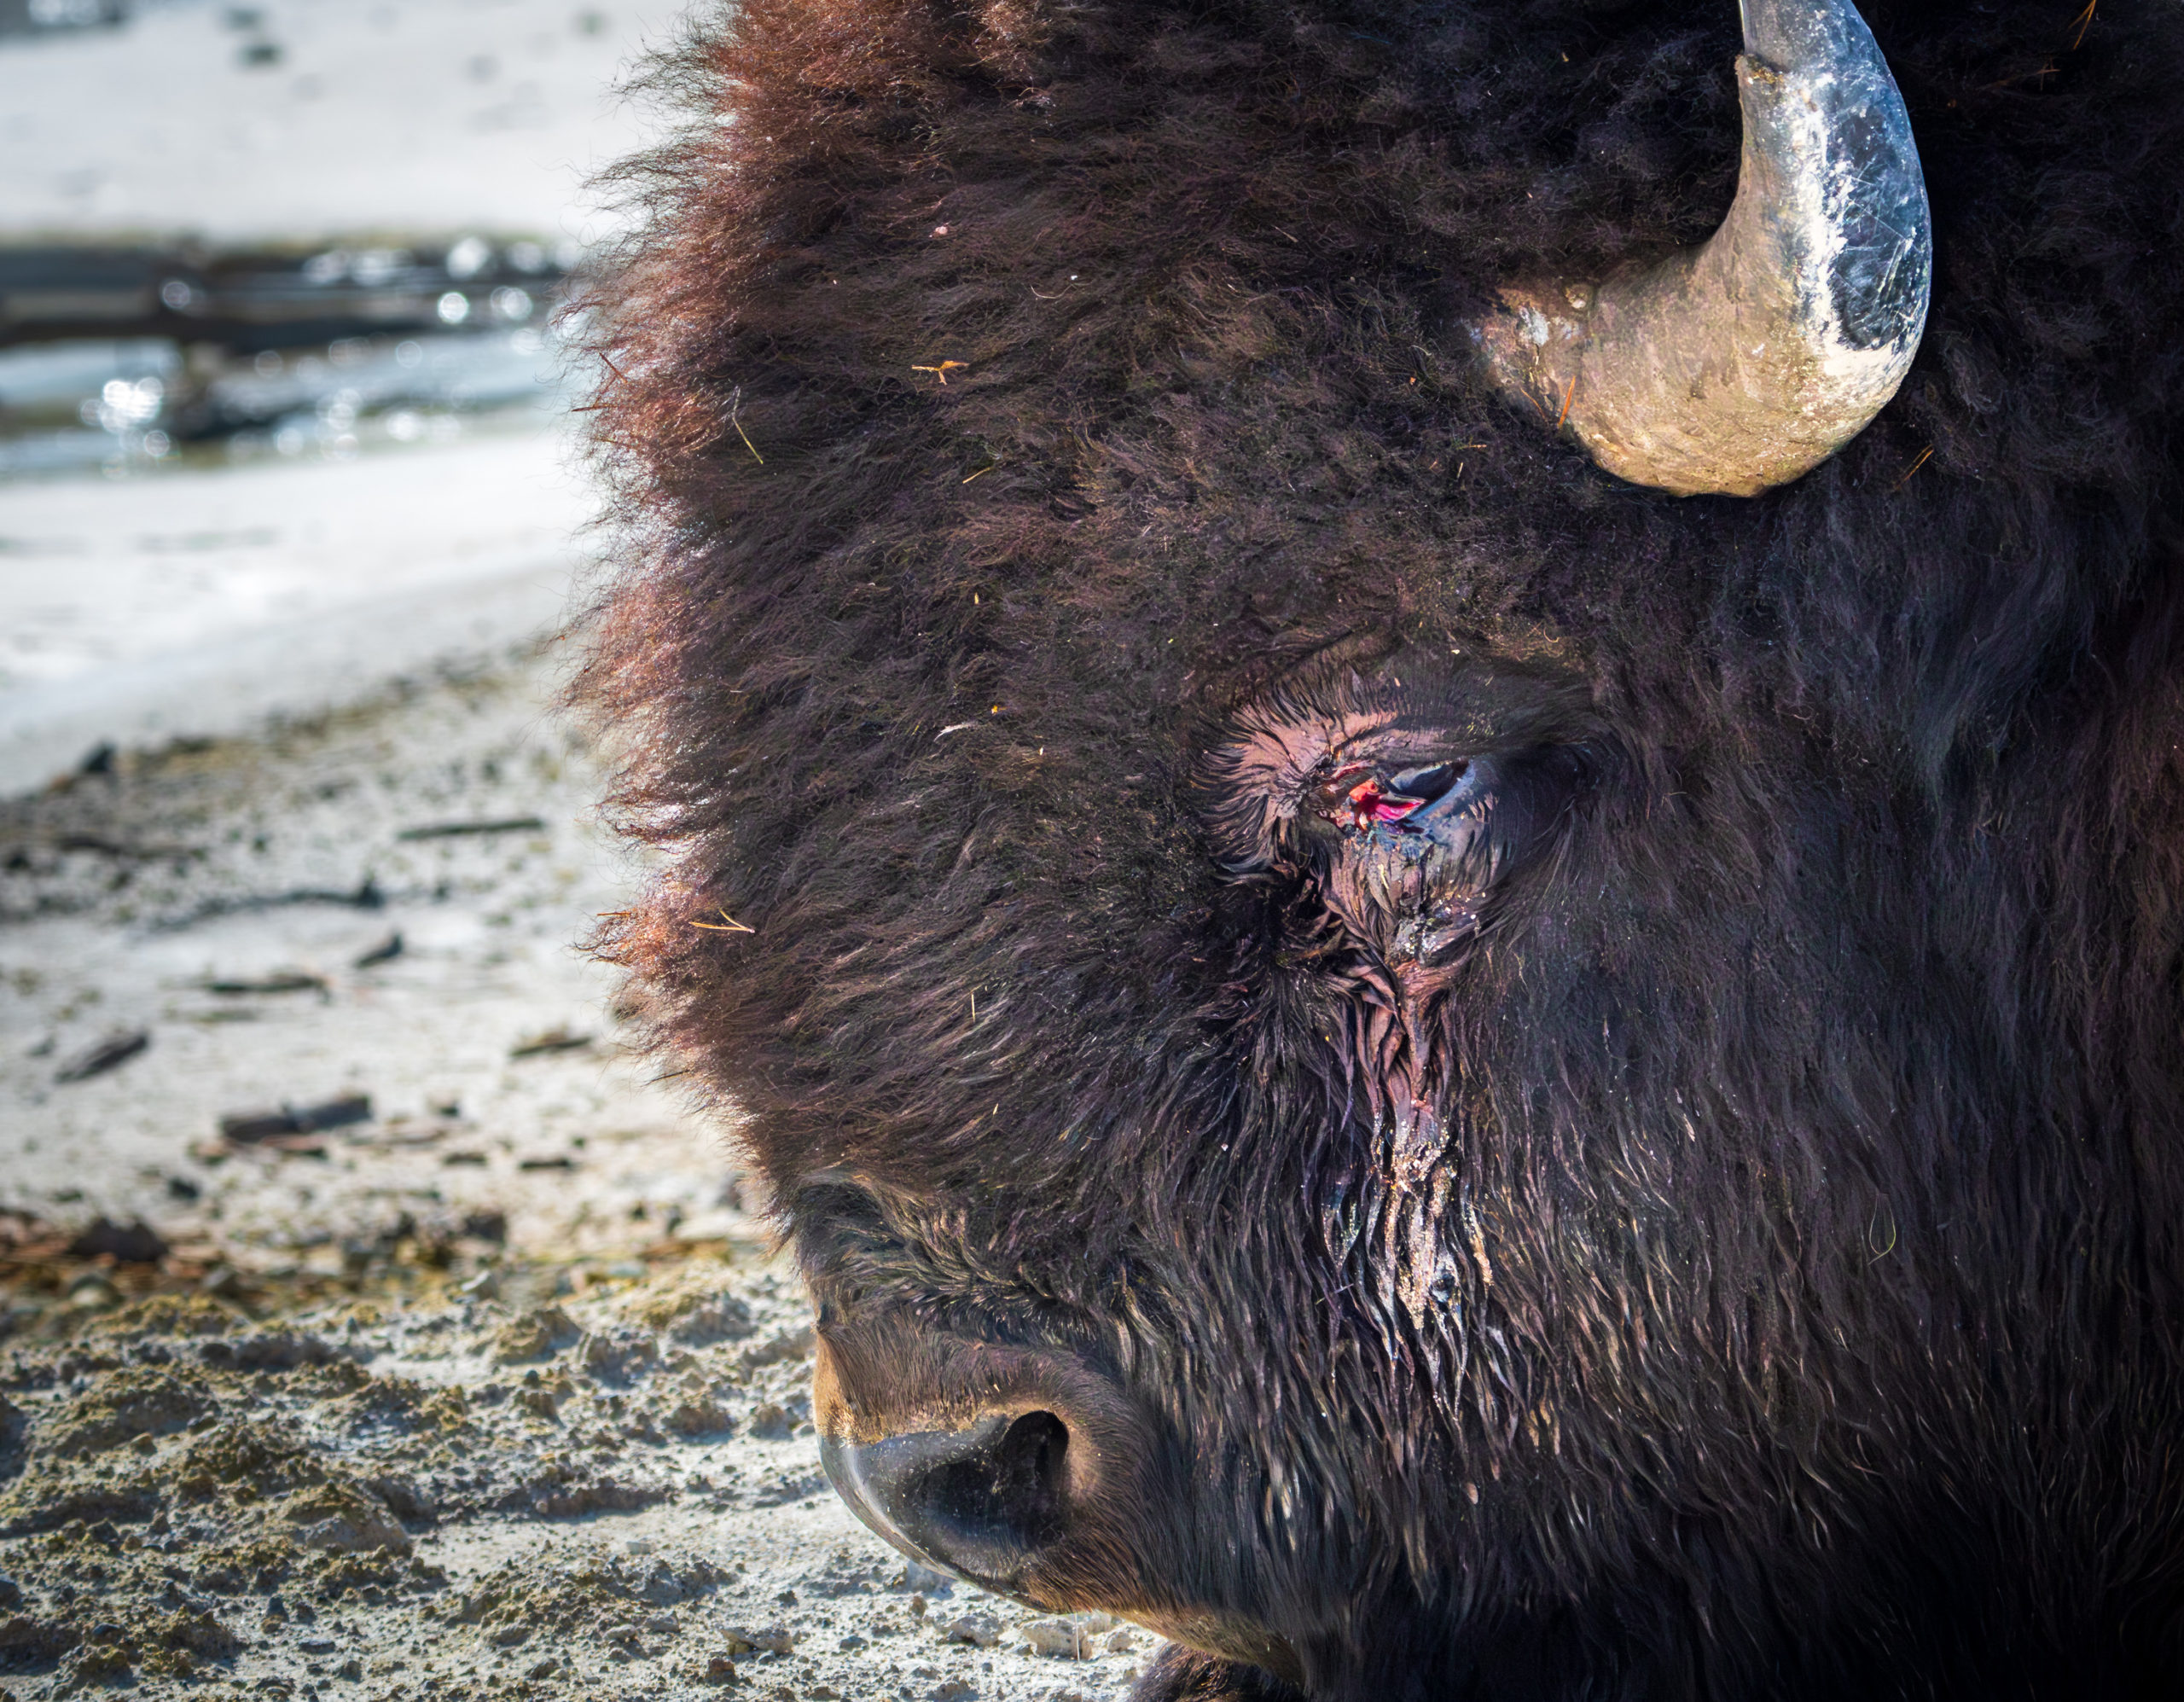 Bison with eye injury